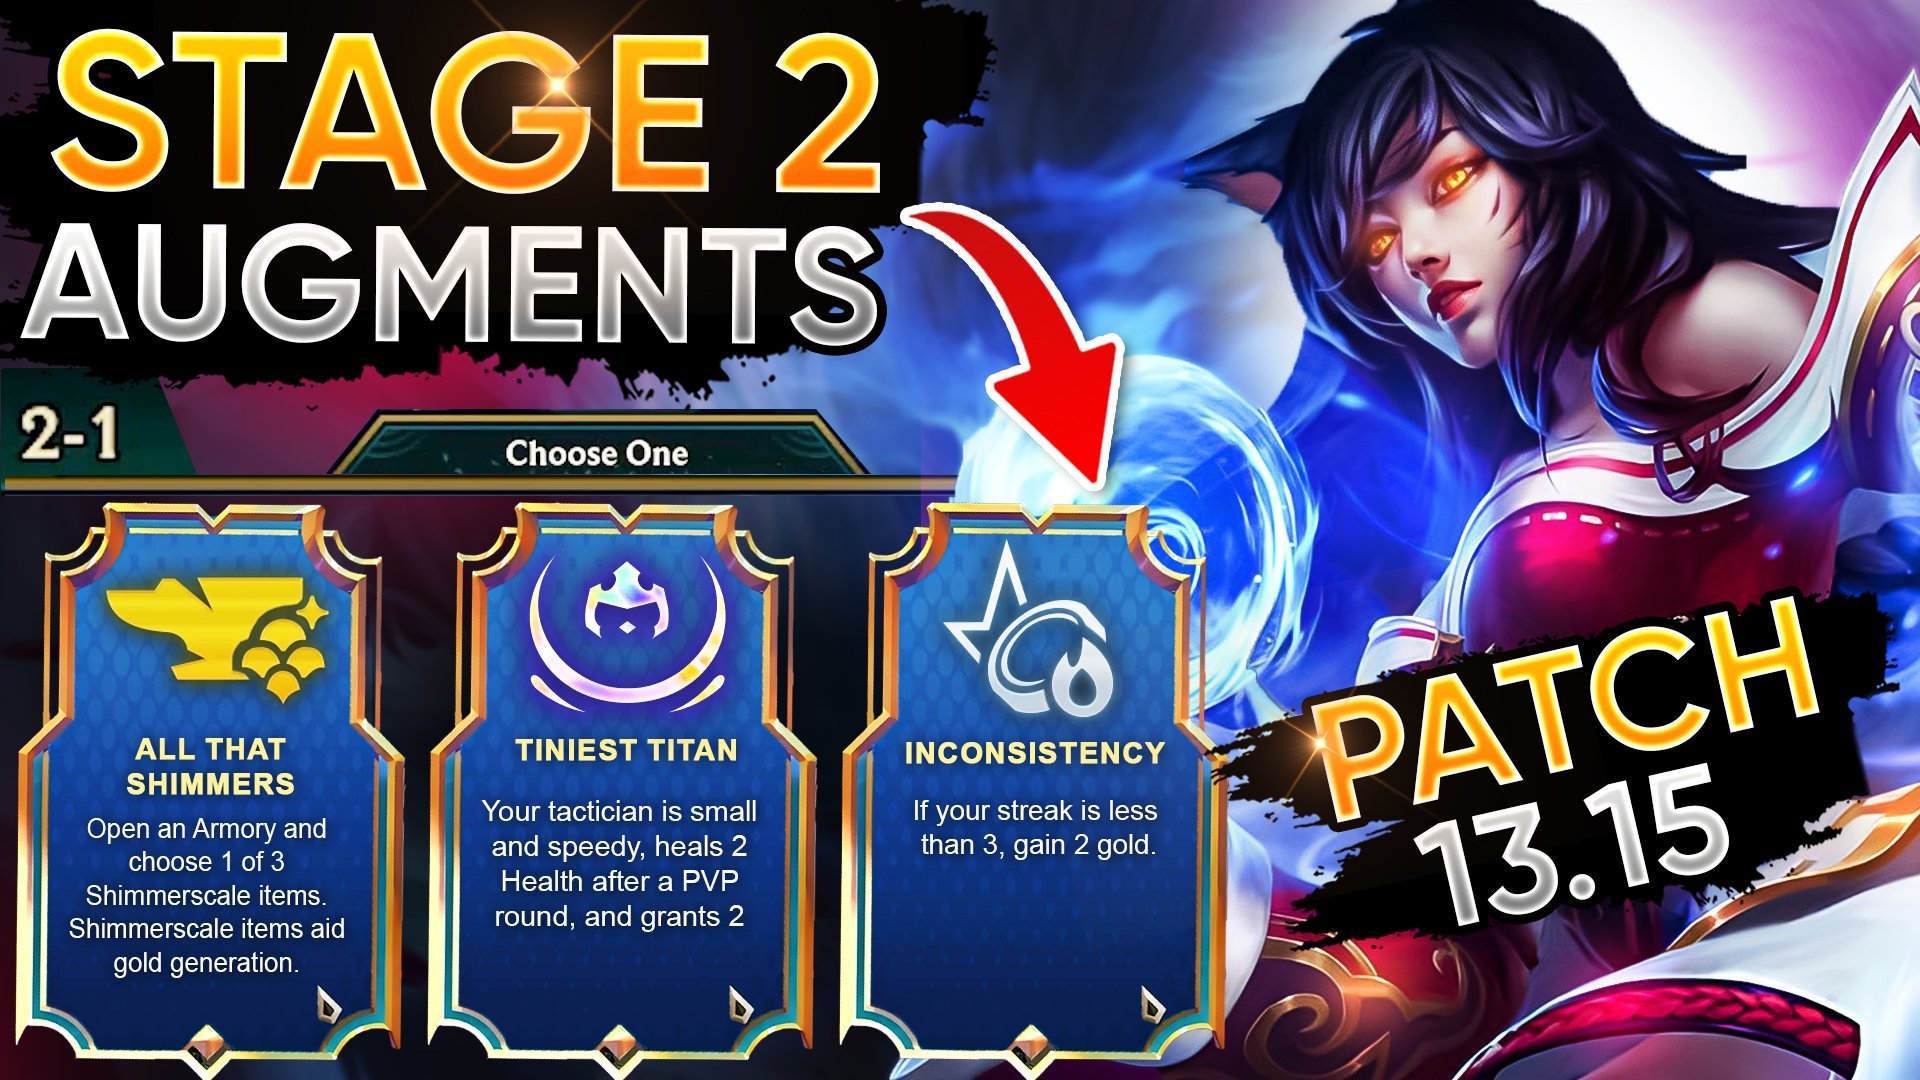 Augment Guide for Patch 13.15 Early Game (Stage 2-1)